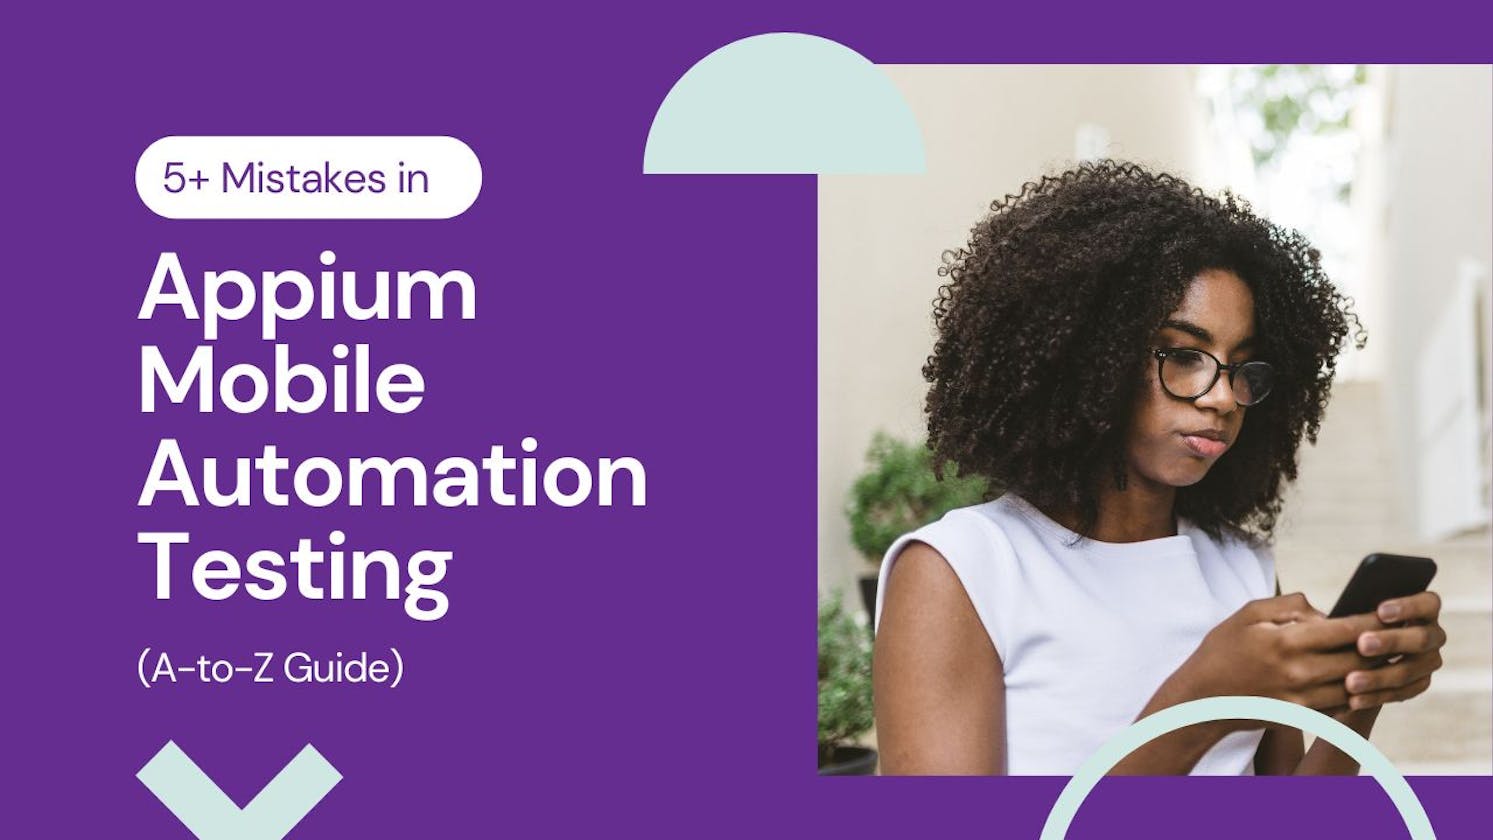 5+ Mistakes in Appium Mobile Automation Testing: A-to-Z Guide!